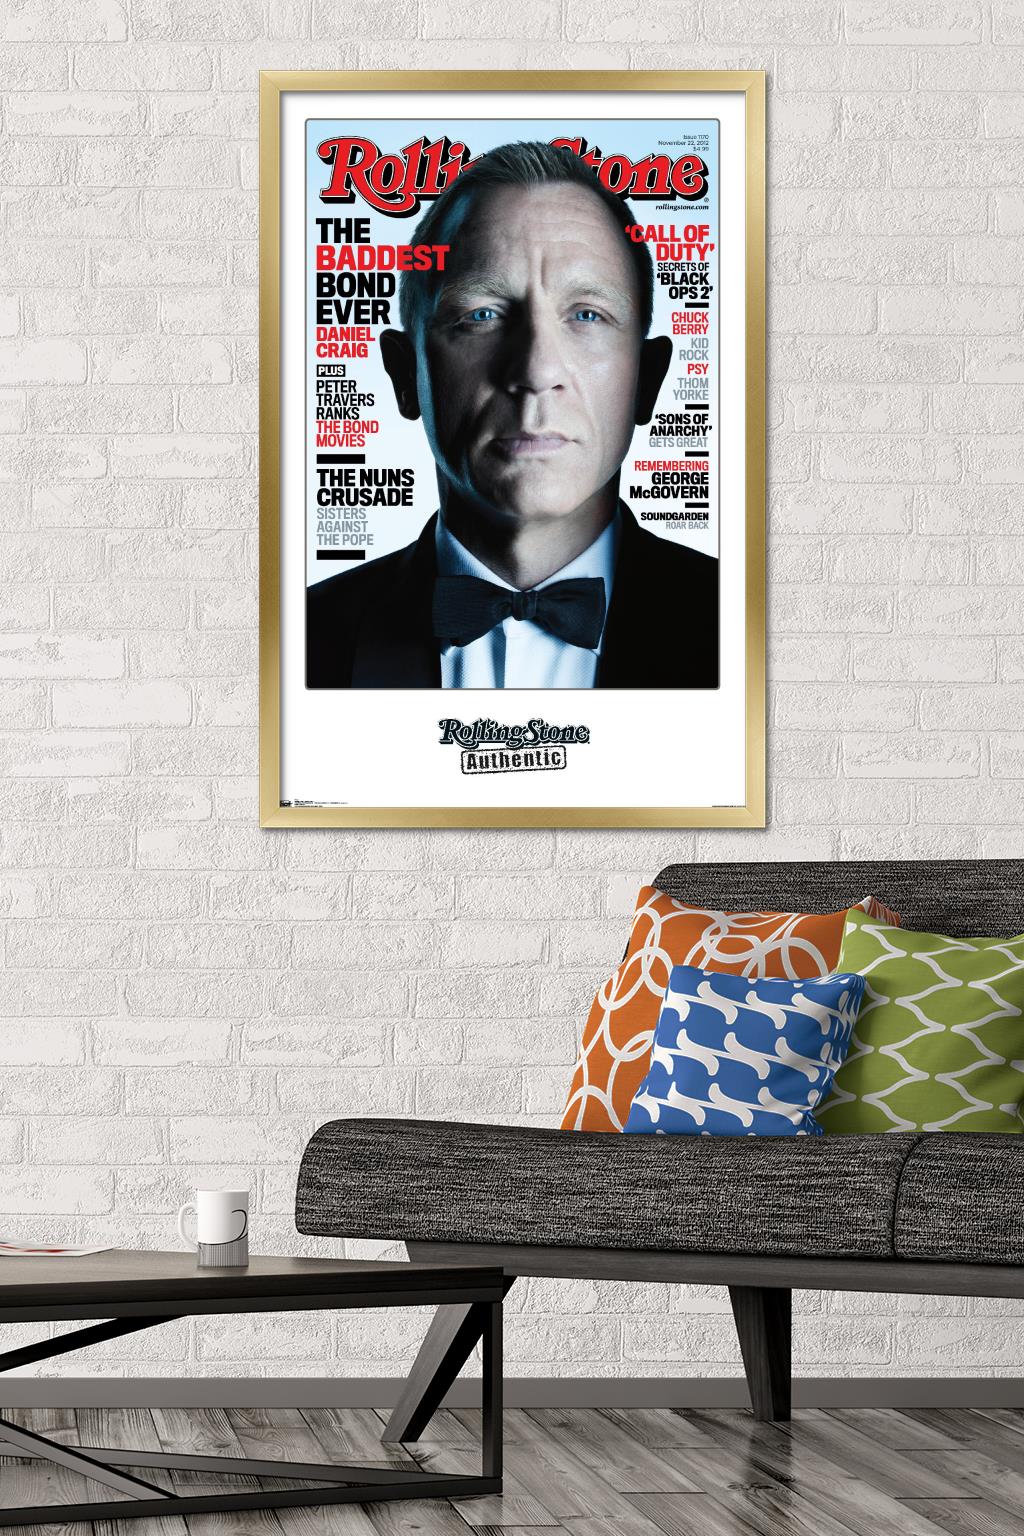 Rolling Stone Magazine - Daniel Craig 12 Wall Poster, 22.375" x 34", Framed - image 2 of 5